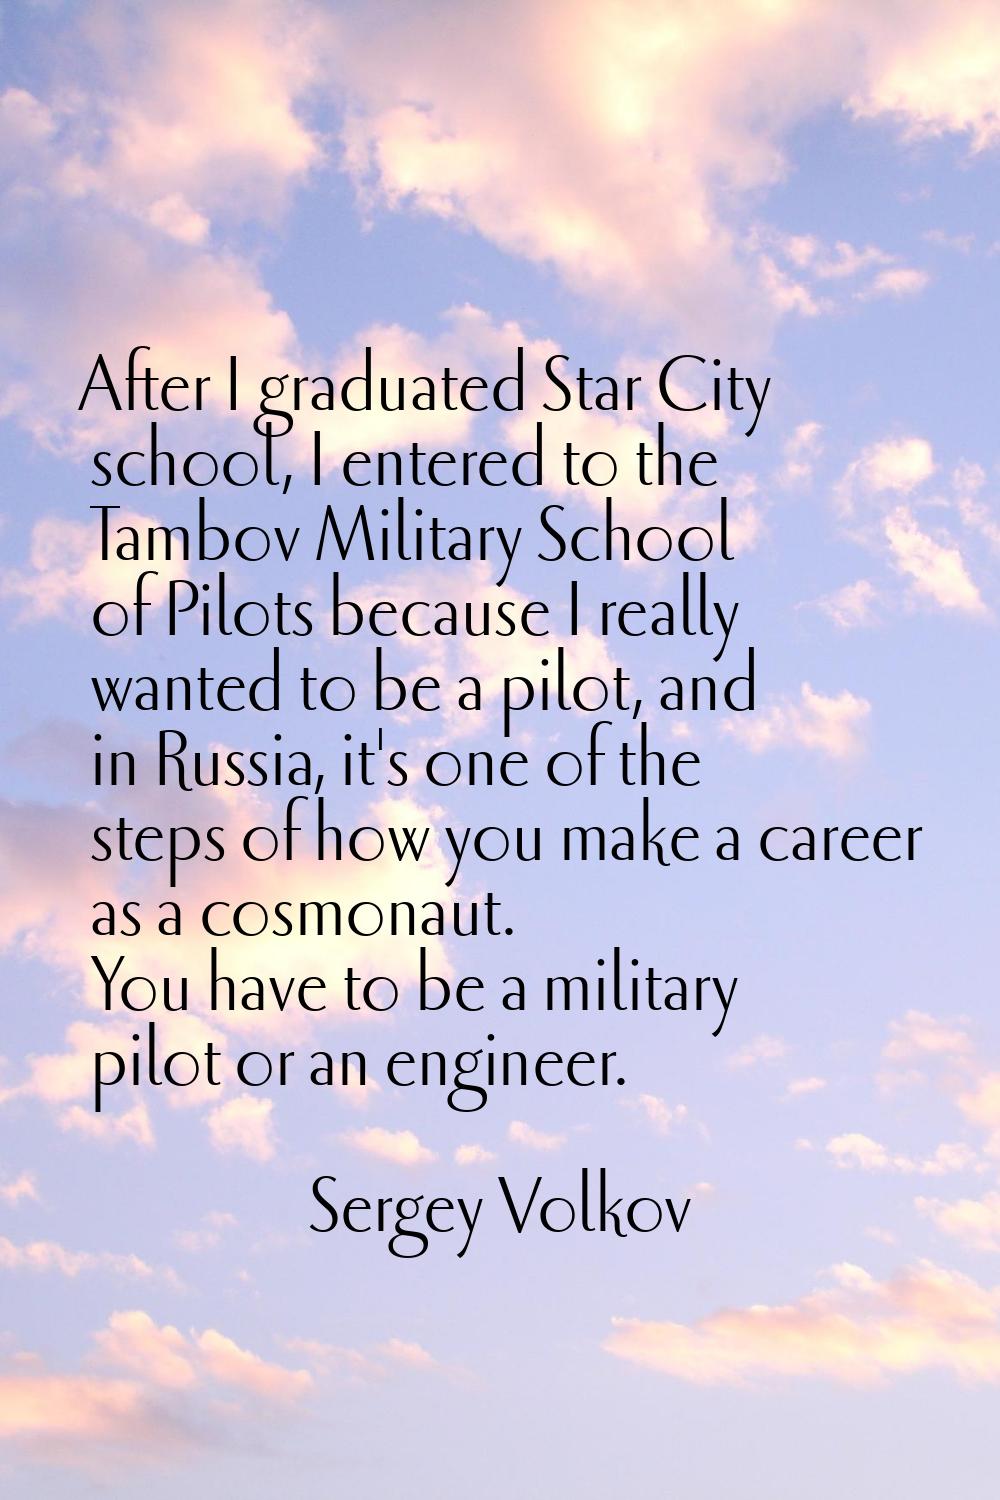 After I graduated Star City school, I entered to the Tambov Military School of Pilots because I rea